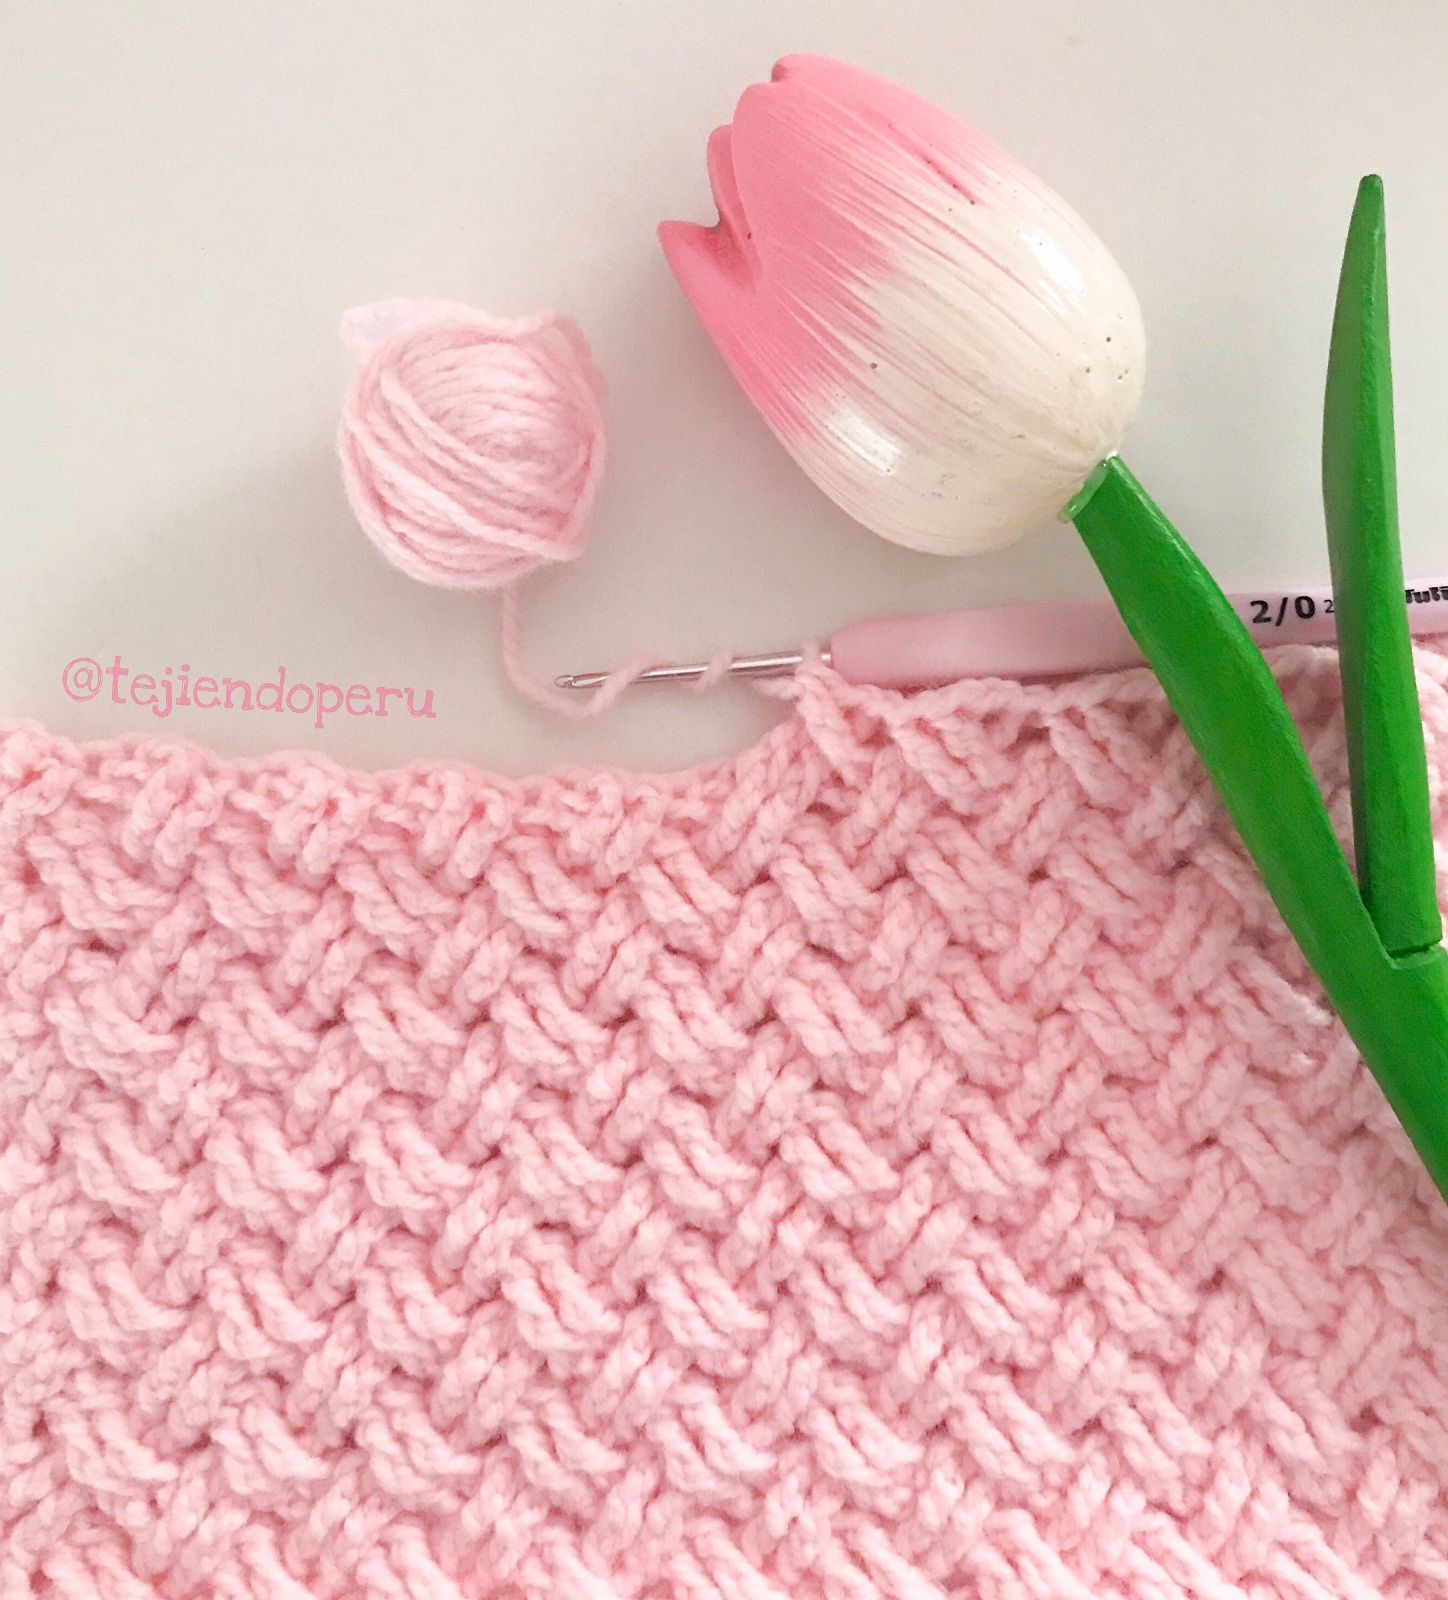 How to Crochet a Cable Stitch - Easy Crochet Patterns